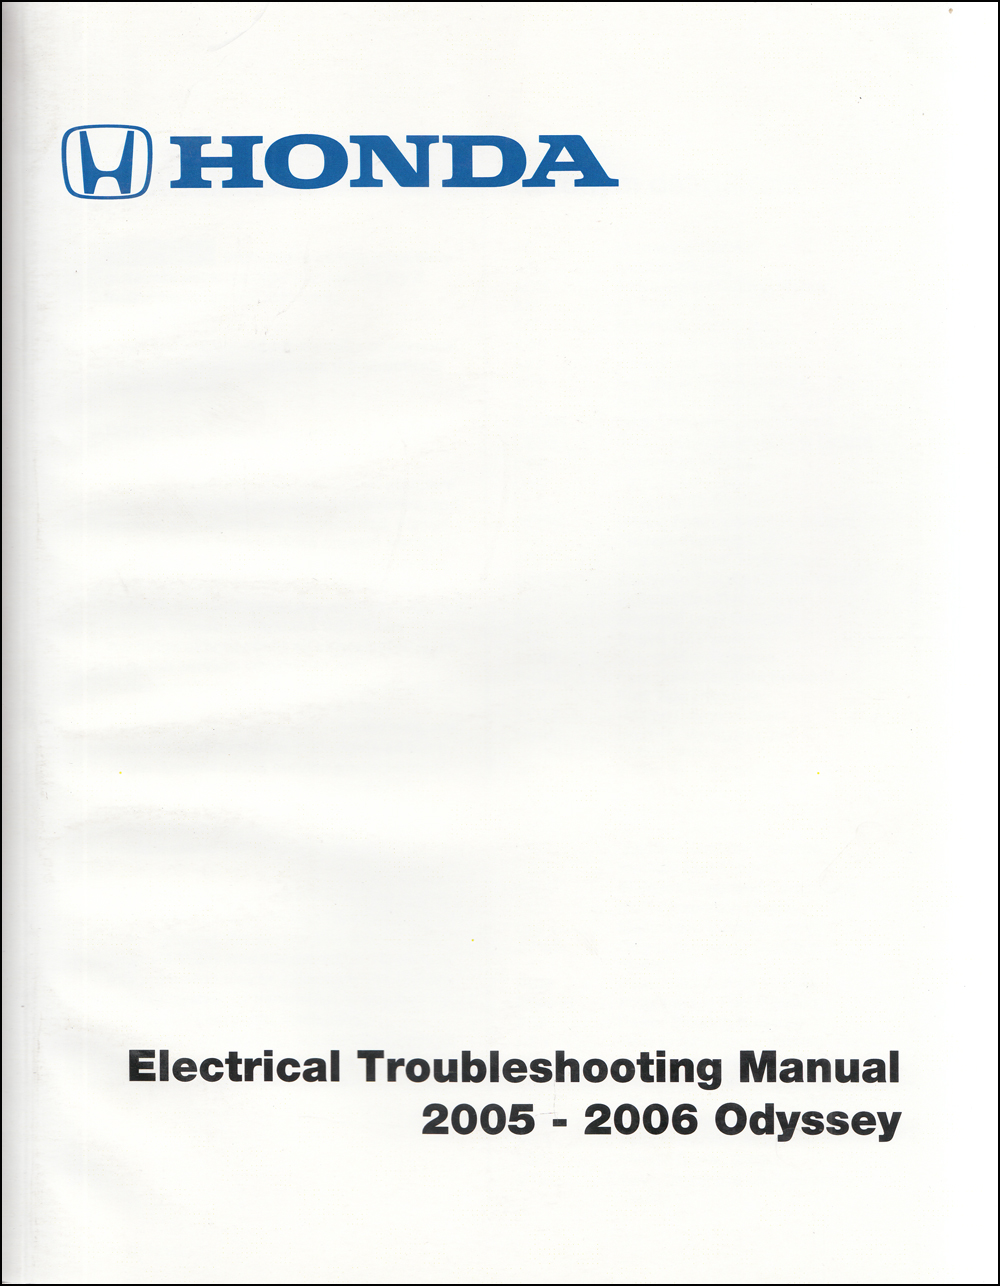 2005-2006 Honda Odyssey Electrical Troubleshooting Manual Factory Reprint